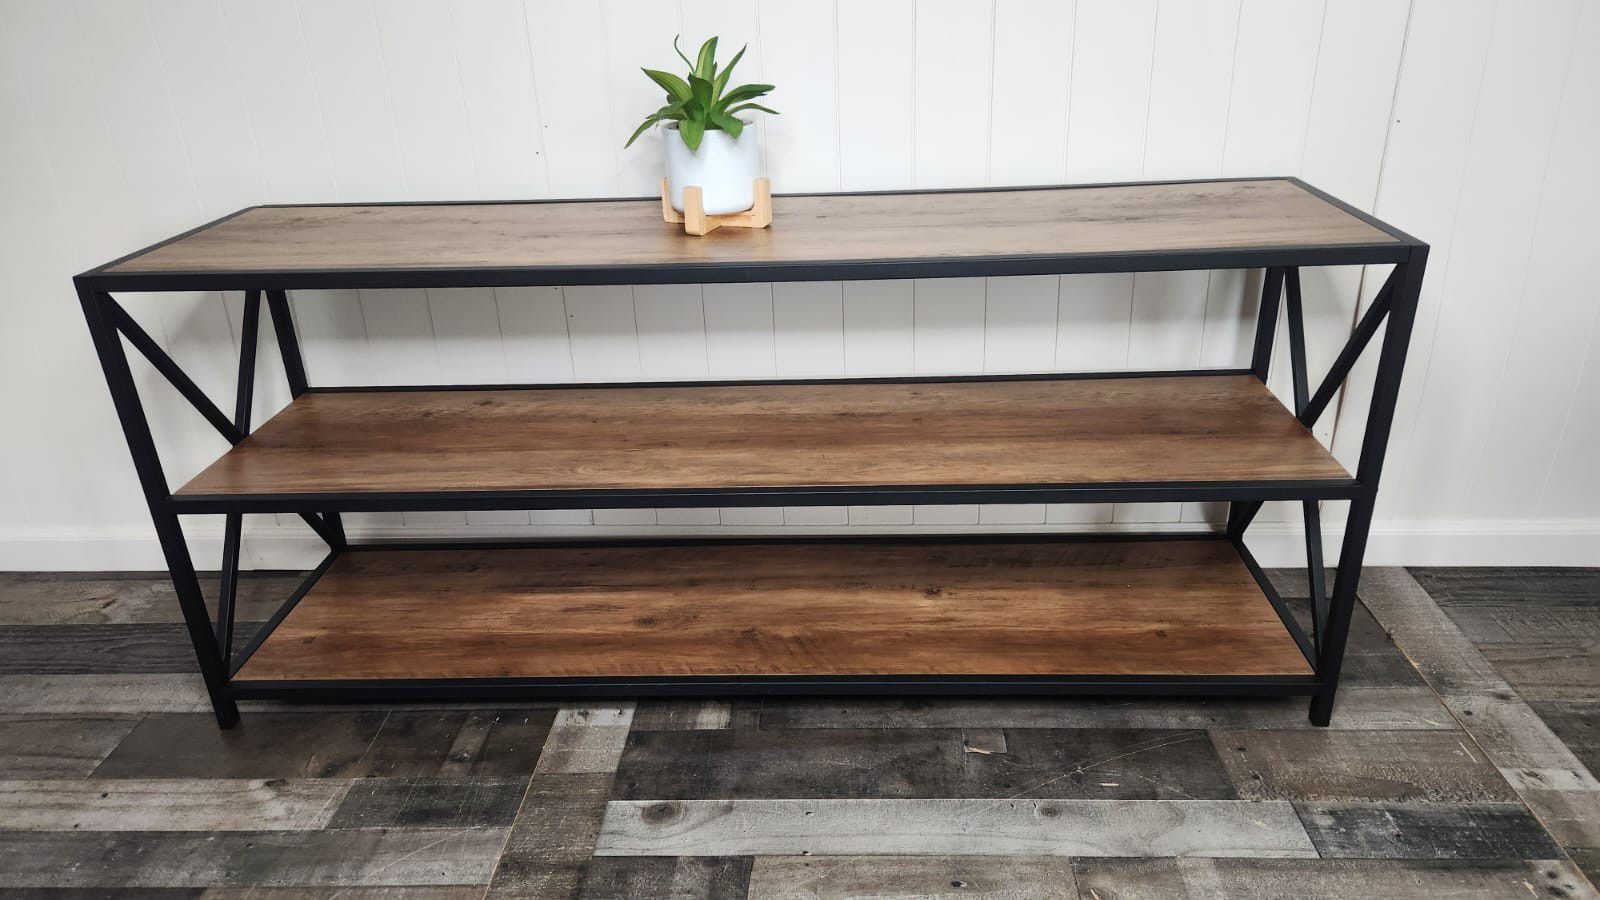 Rustic Entryway Console Table, Long Hallway Table / TV Stand / Bookcase Shelf